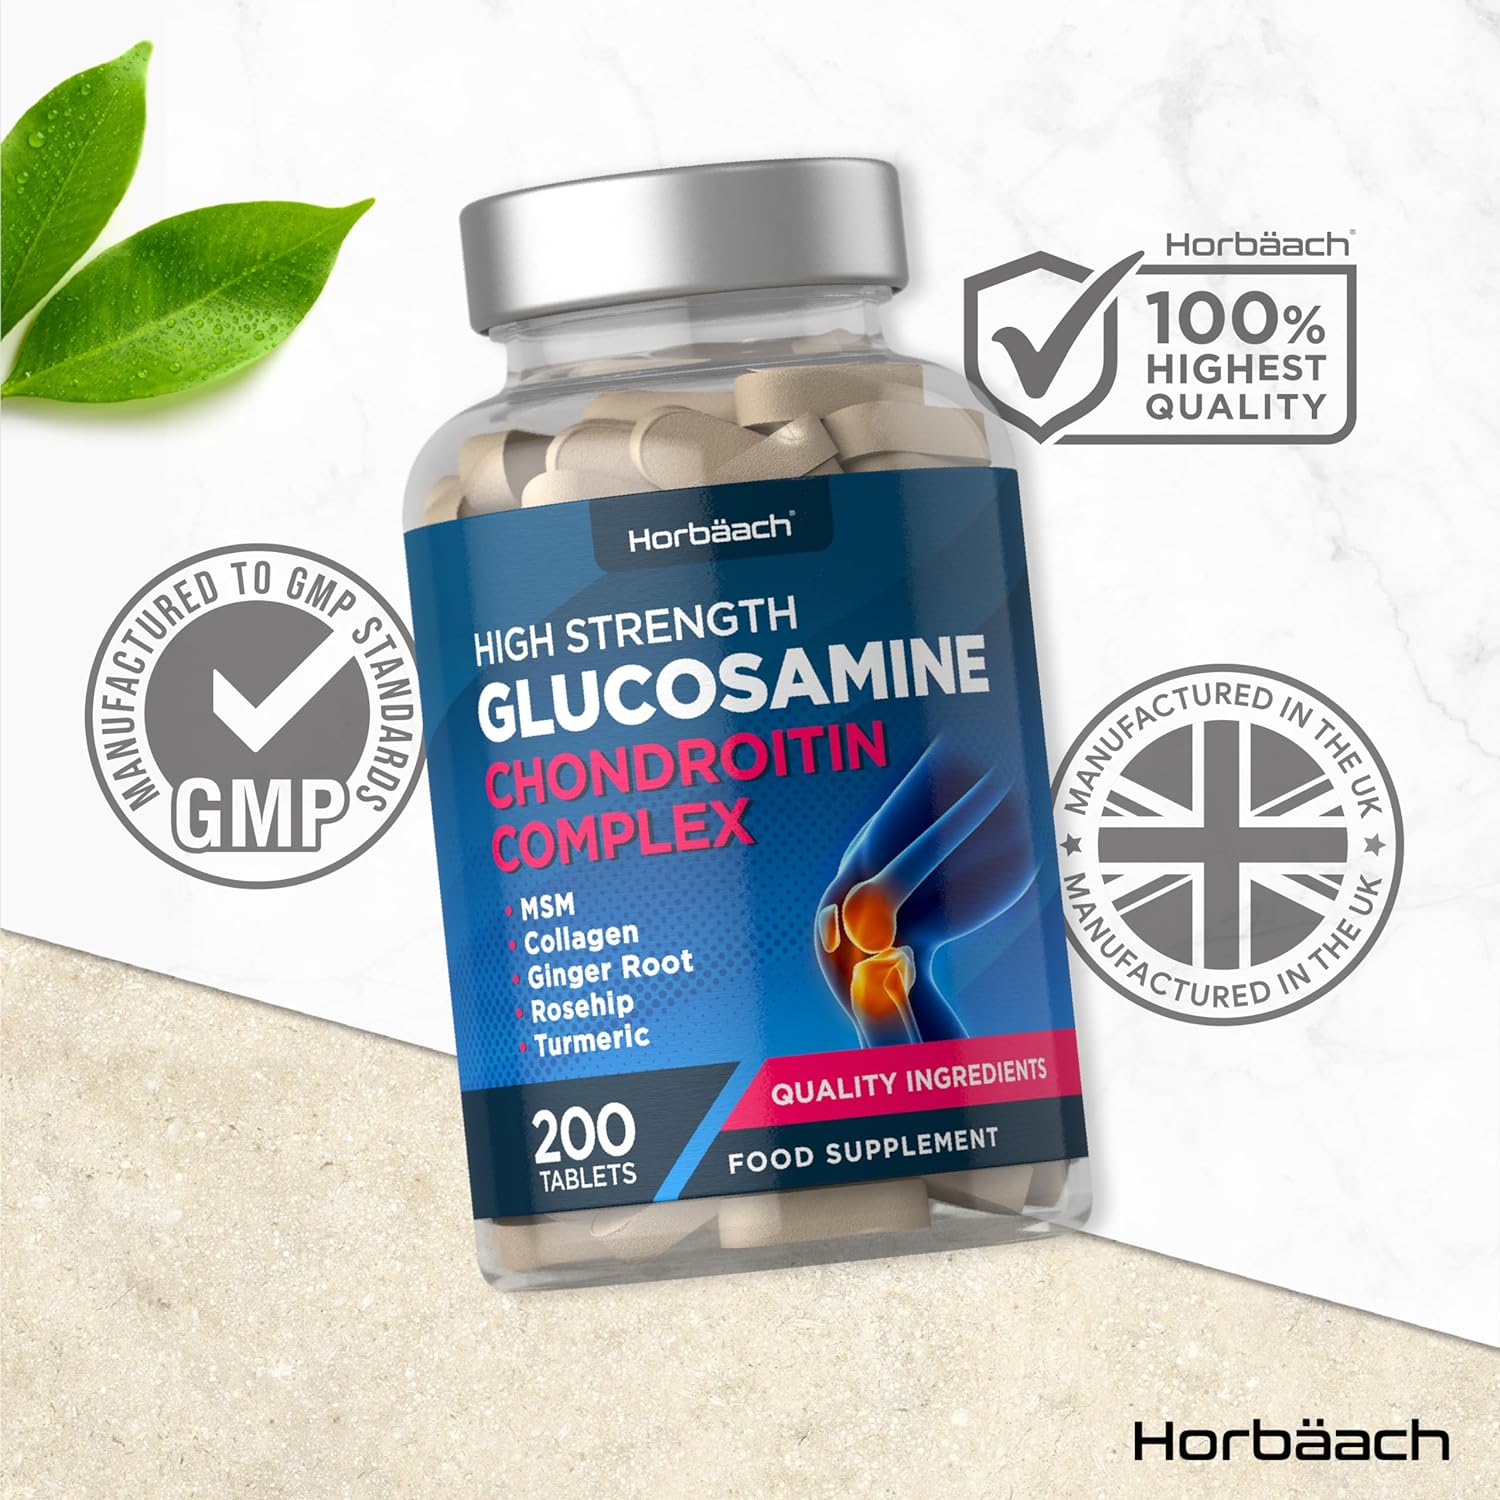 Glucosamine and Chondroitin High Strength Complex | 200 Tablets | with MSM, Collagen, Ginger Root and Bioflavonoids | by Horbaach